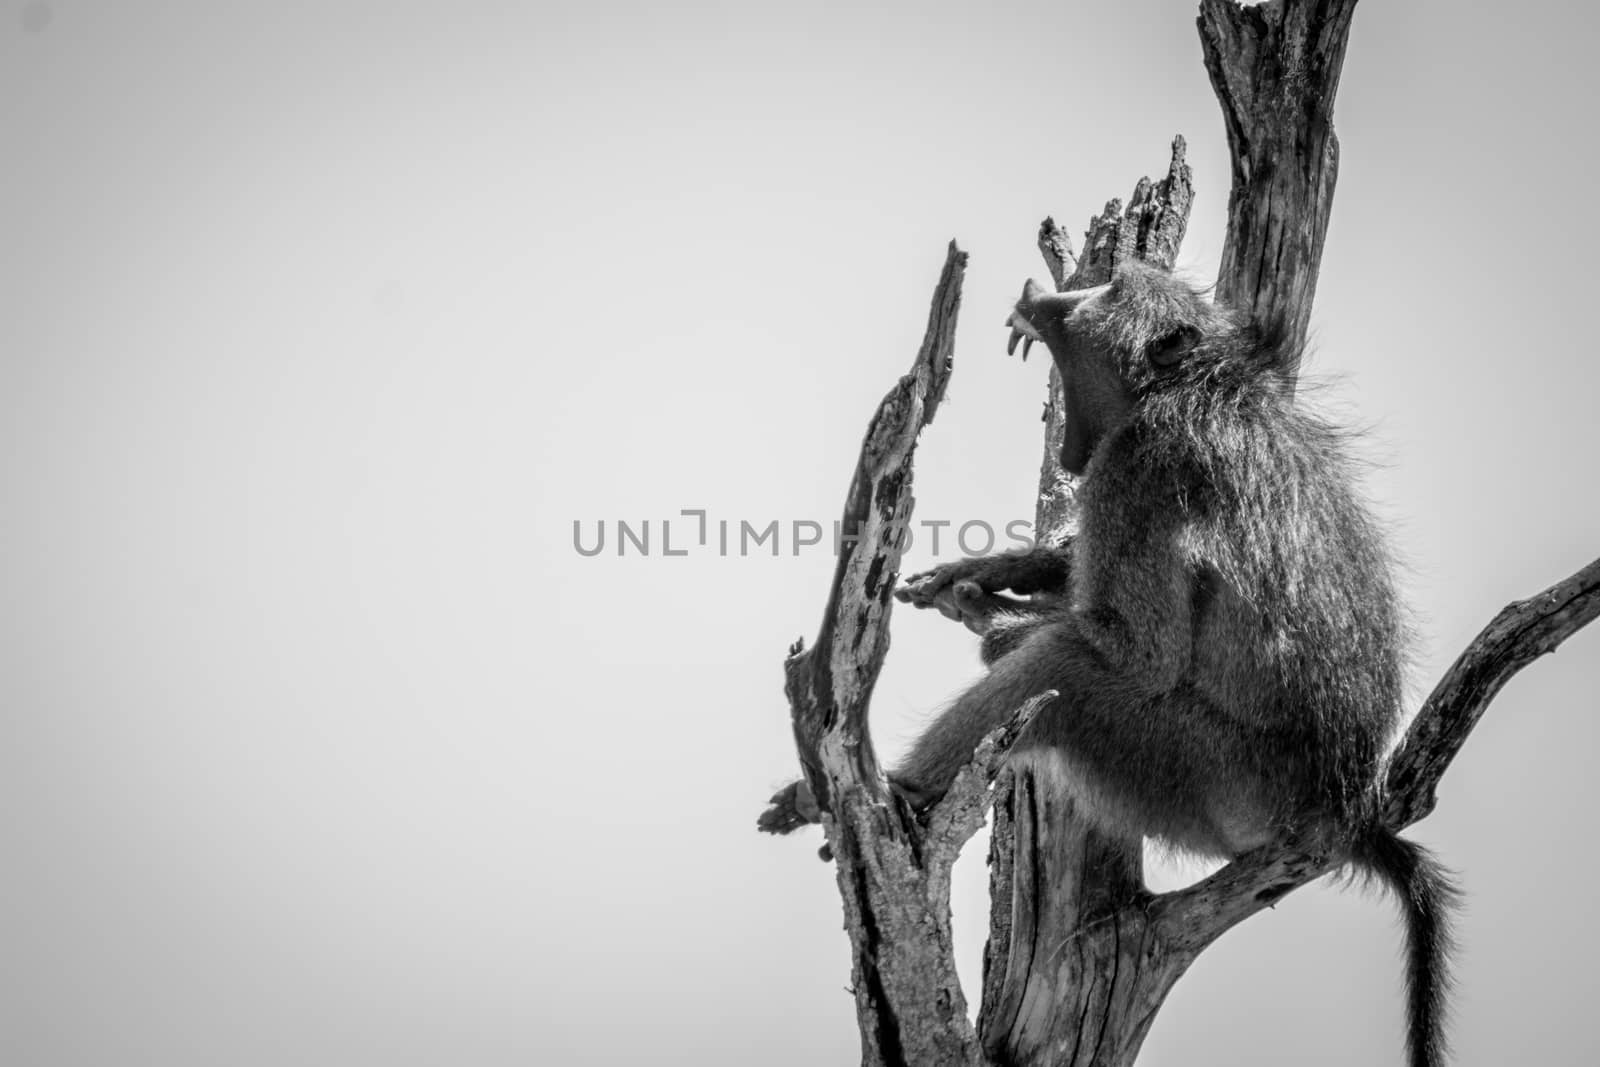 Baboon yawning in a dead tree in black and white in the Kruger National Park, South Africa.